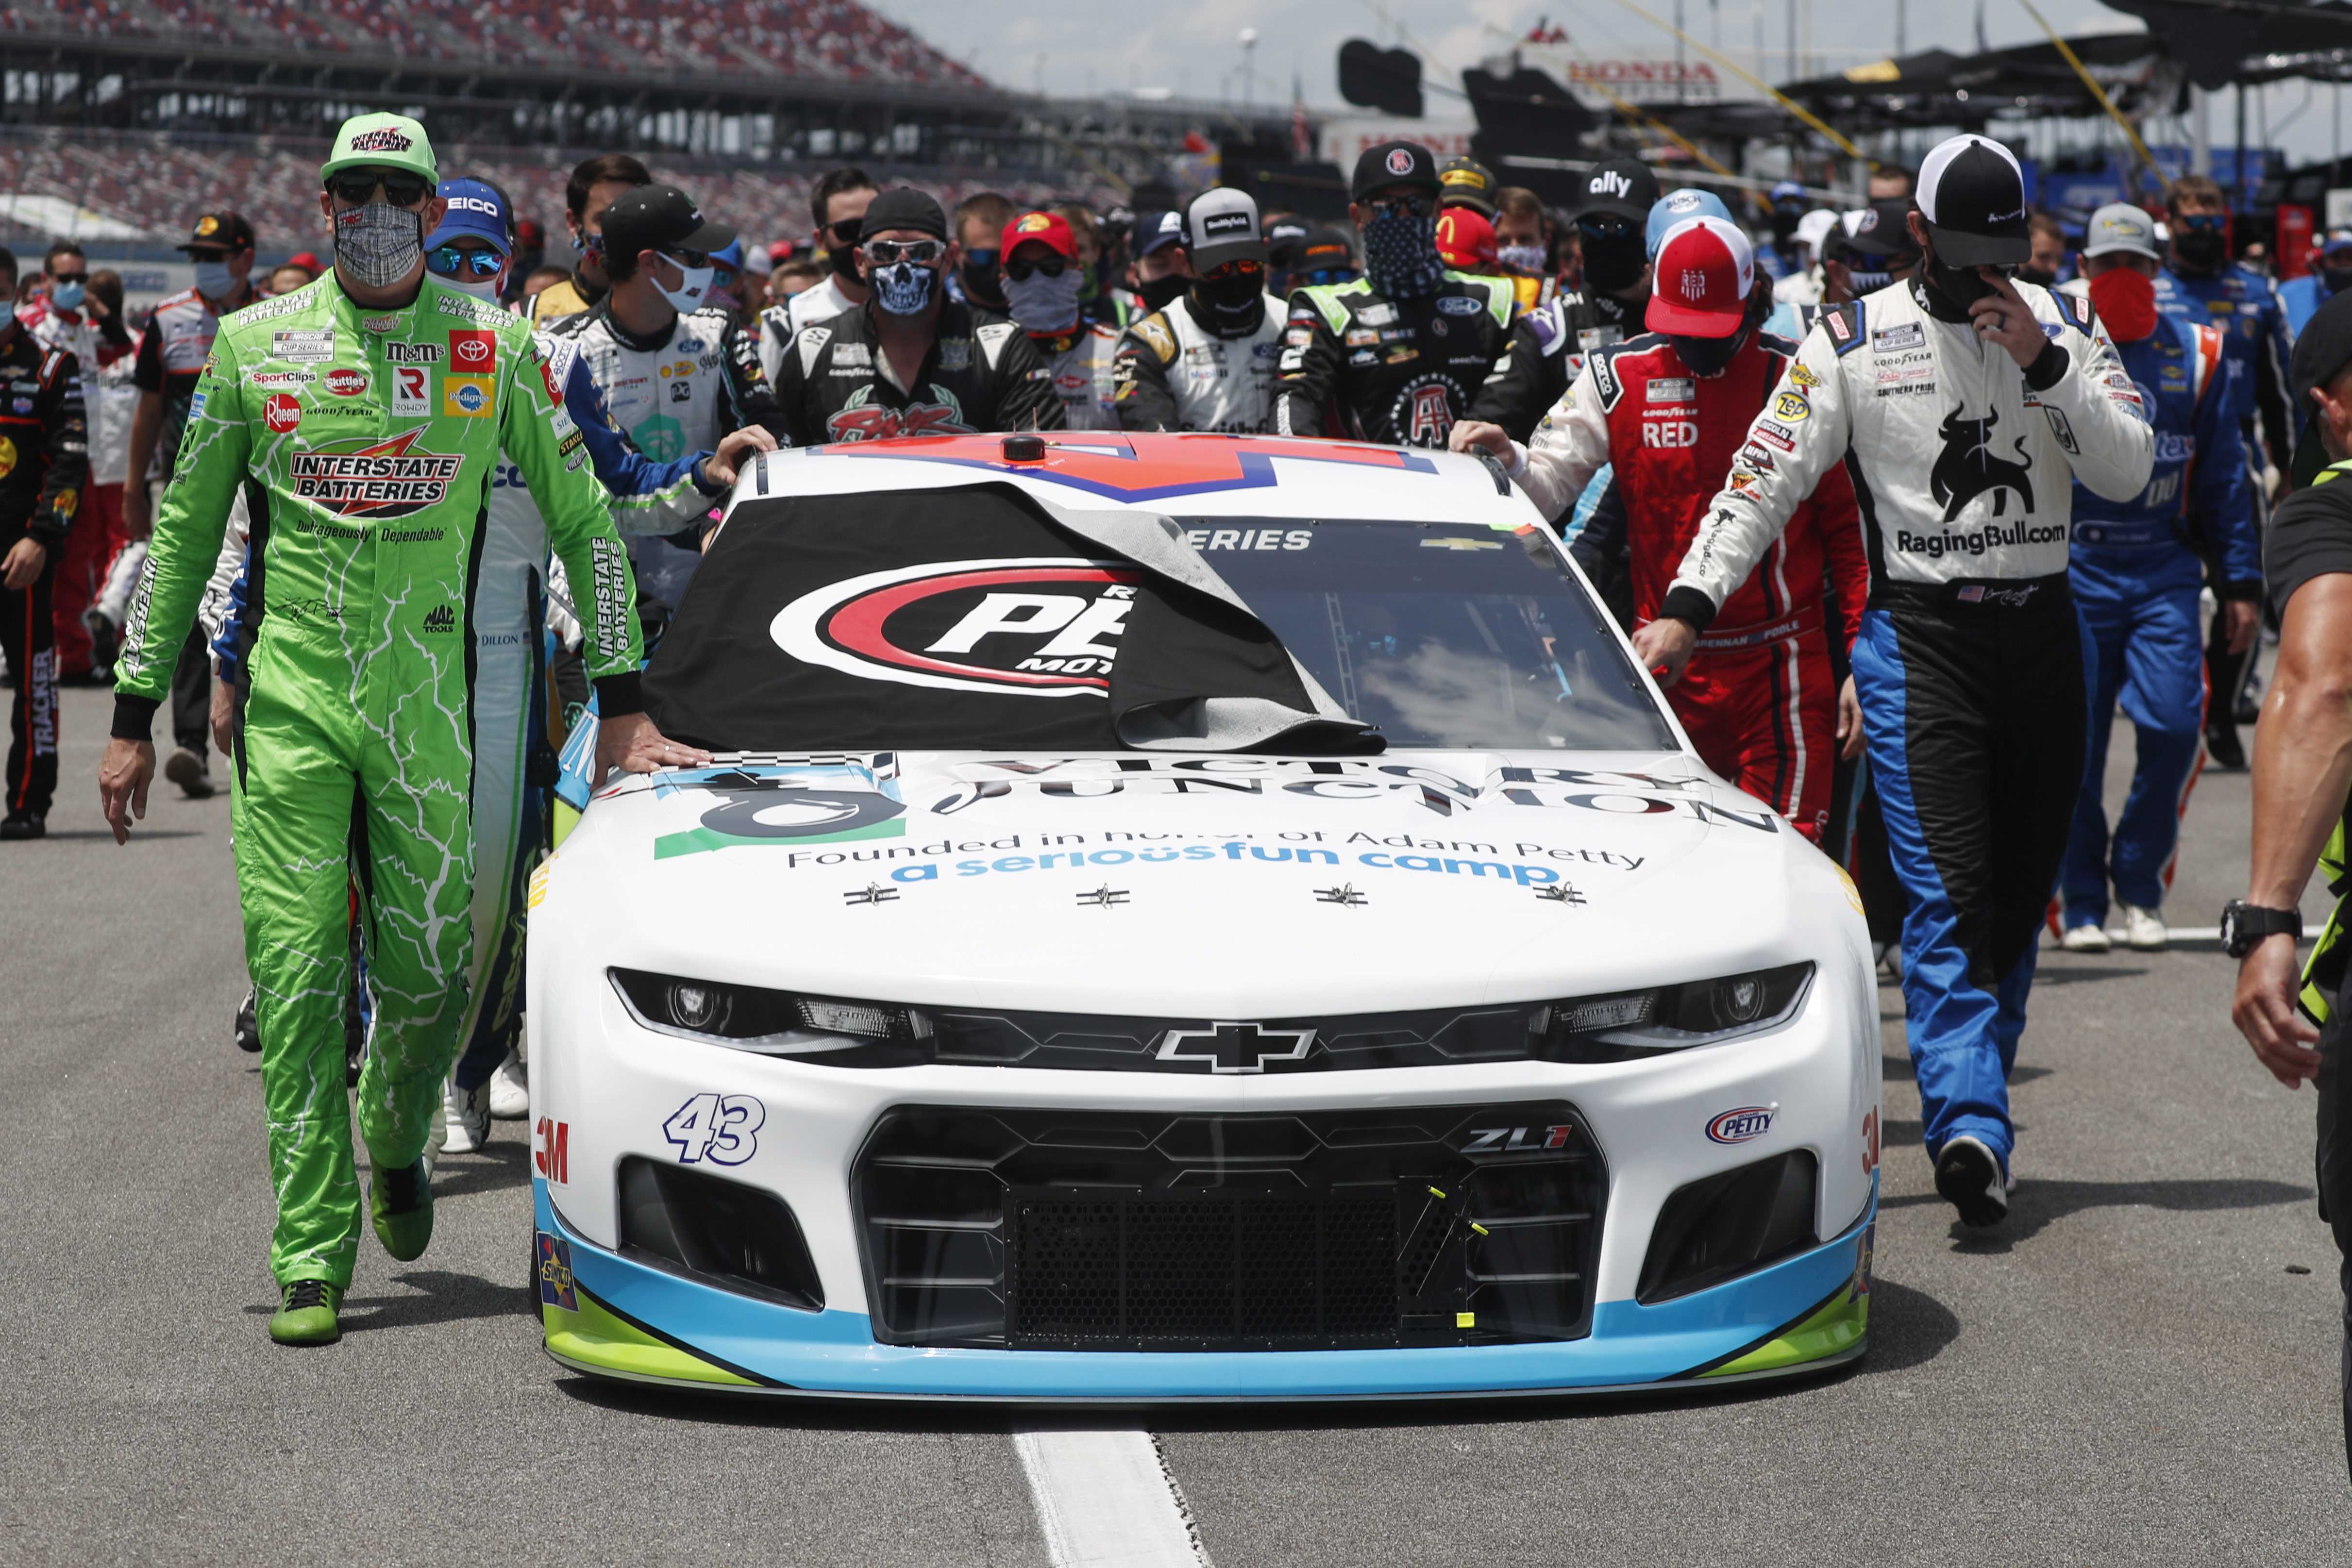 Watch NASCAR drivers push Bubba Wallaces car to the front of field before race in show of support